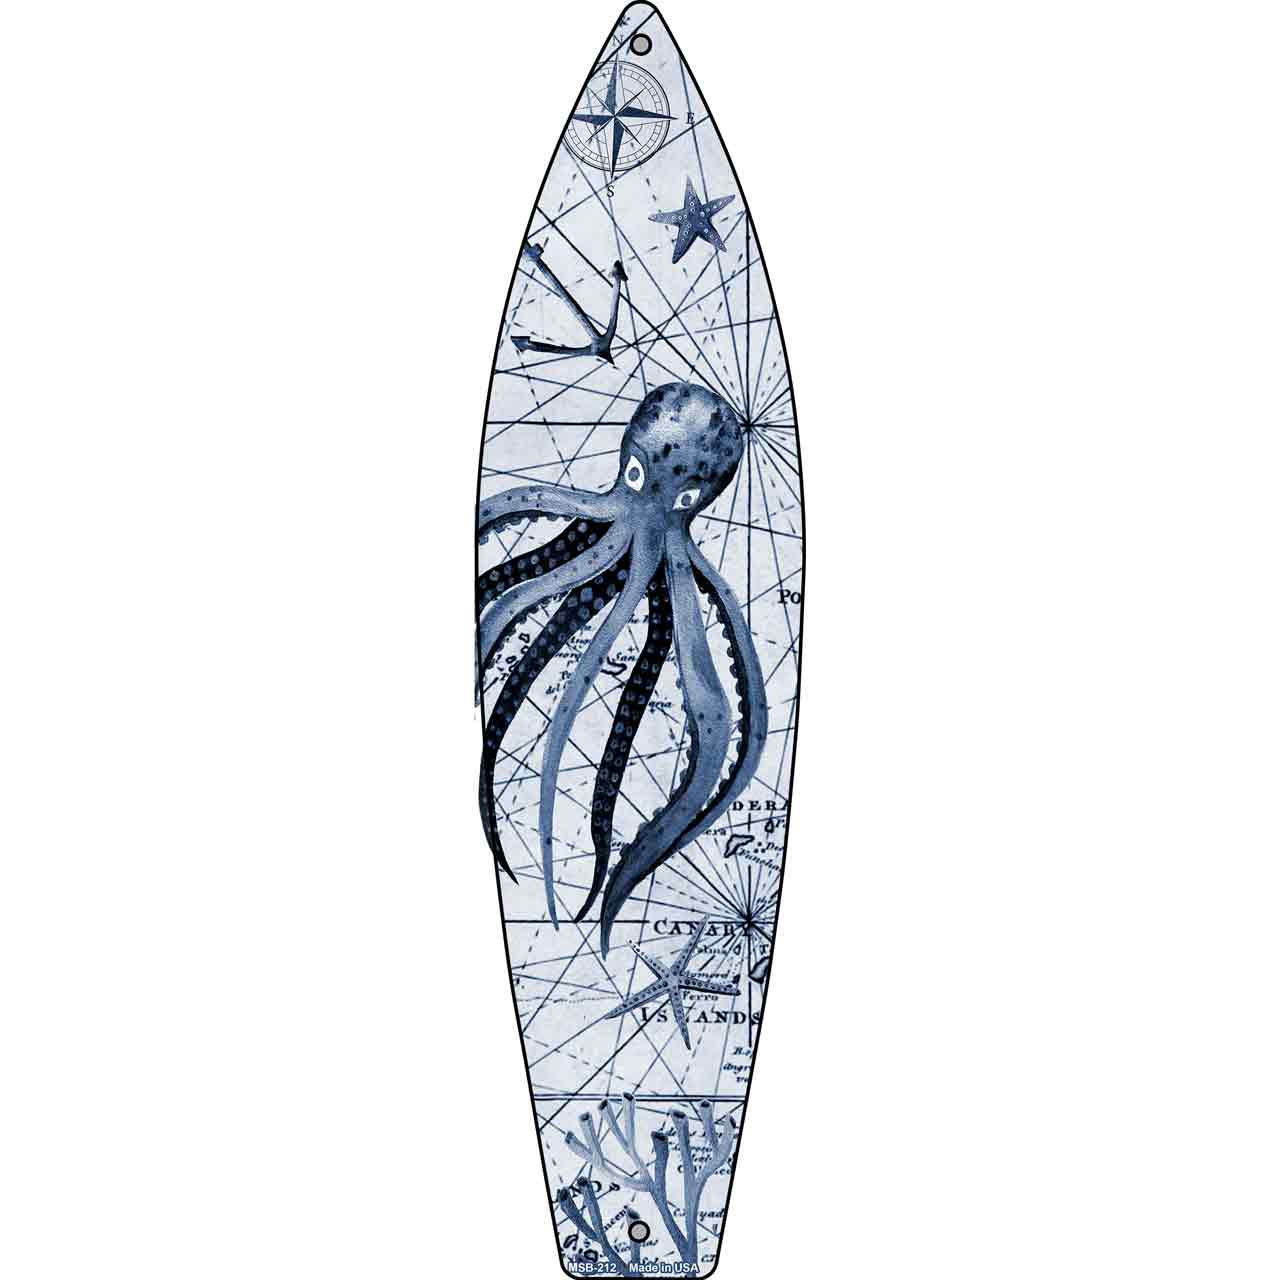 Black and White Octopus Novelty Mini Metal Surfboard MSB-212